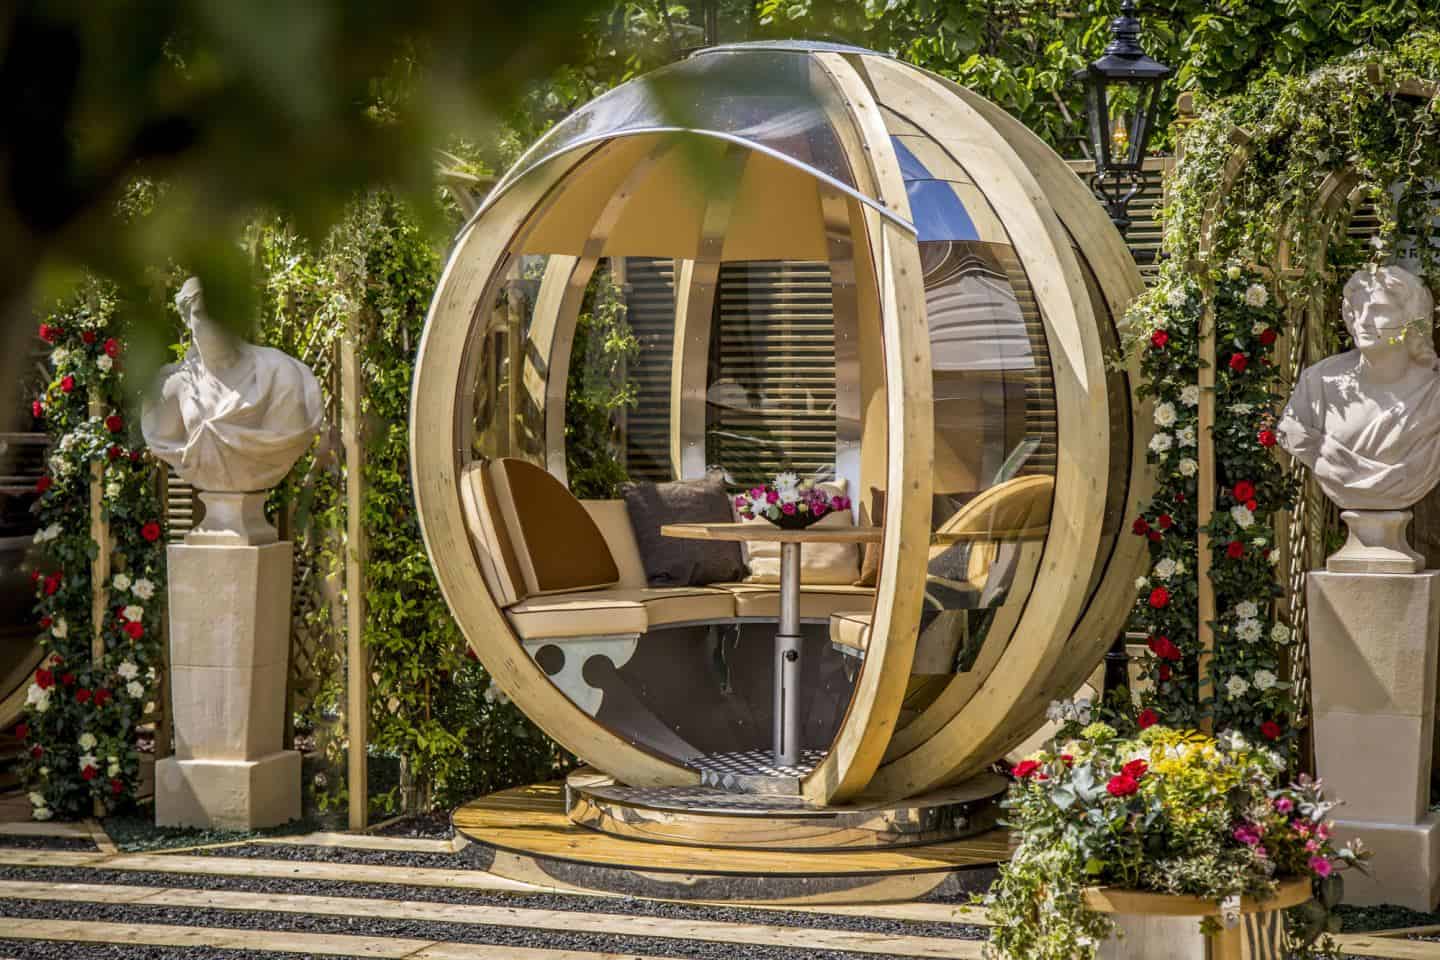 A rotating lounger garden pod flanked by two marble busks on plinths.